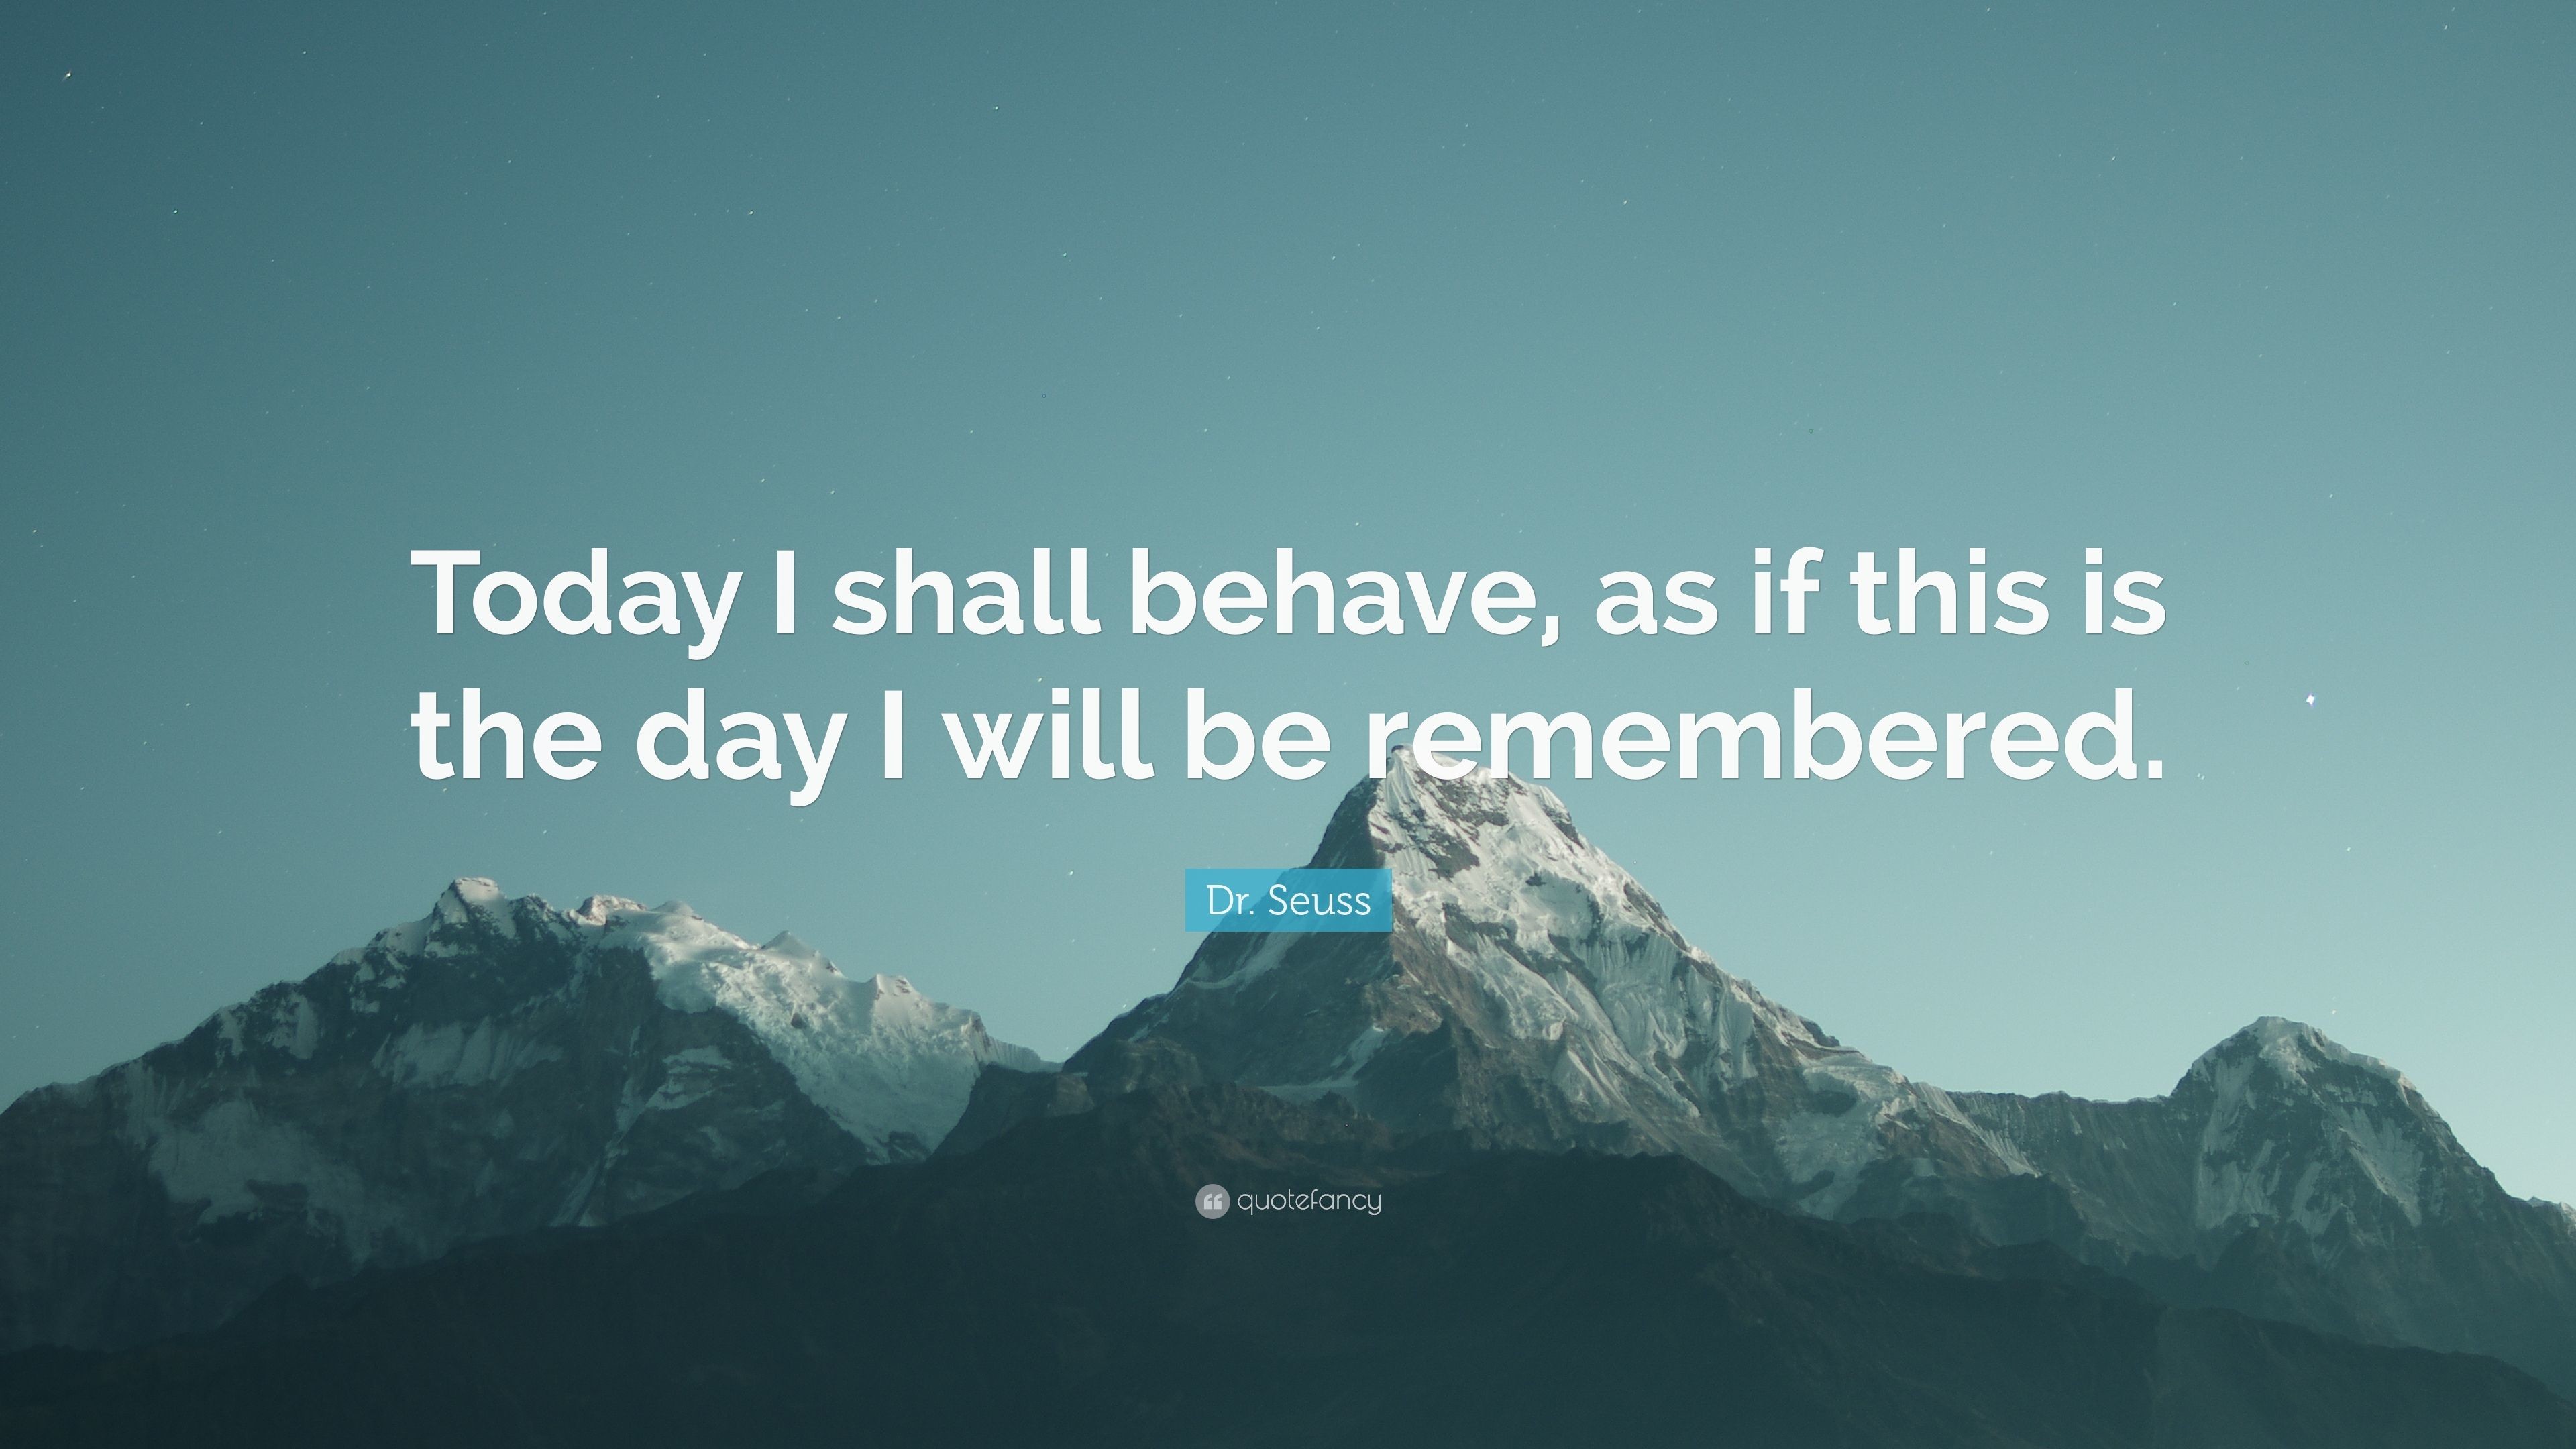 3840x2160 Dr. Seuss Quote: “Today I shall behave, as if this is the